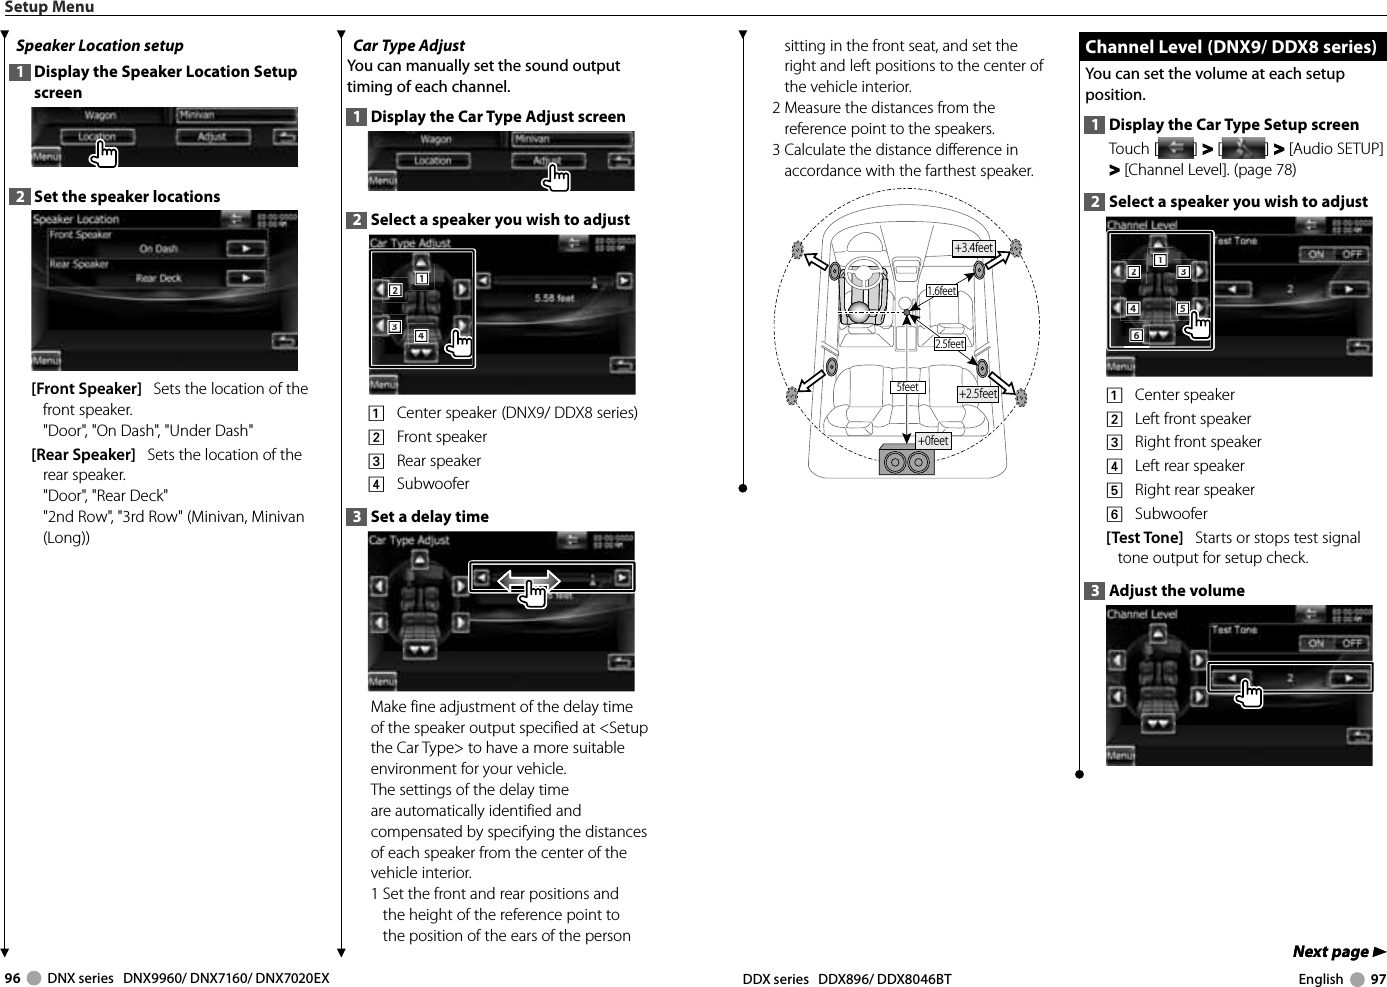 96     DNX series   DNX9960/ DNX7160/ DNX7020EX DDX series   DDX896/ DDX8046BT English     97Next page 3Next page 3sitting in the front seat, and set the right and left positions to the center of the vehicle interior.2  Measure the distances from the reference point to the speakers.3  Calculate the distance difference in accordance with the farthest speaker.1.6feet2.5feet5feet +2.5feet+0feet+3.4feet Channel Level  (DNX9/ DDX8 series) Channel Level  (DNX9/ DDX8 series)You can set the volume at each setup position.1  Display the Car Type Setup screenTouch [ ] &gt;  &gt; [ ] &gt;  &gt; [Audio SETUP] &gt; &gt; [Channel Level]. (page 78)2  Select a speaker you wish to adjust2221114443335556661    Center speaker2    Left front speaker3    Right front speaker4    Left rear speaker5    Right rear speaker6    Subwoofer[Test Tone]   Starts or stops test signal tone output for setup check.3  Adjust the volumeSetup MenuSpeaker Location setup1  Display the Speaker Location Setup screen2  Set the speaker locations[Front Speaker]   Sets the location of the front speaker.&quot;Door&quot;, &quot;On Dash&quot;, &quot;Under Dash&quot;[Rear Speaker]   Sets the location of the rear speaker.&quot;Door&quot;, &quot;Rear Deck&quot;&quot;2nd Row&quot;, &quot;3rd Row&quot; (Minivan, Minivan (Long))Car Type Adjust You can manually set the sound output timing of each channel.1  Display the Car Type Adjust screen2  Select a speaker you wish to adjust2221113334441    Center speaker  (DNX9/ DDX8 series)2    Front speaker3    Rear speaker4    Subwoofer3  Set a delay timeMake fine adjustment of the delay time of the speaker output specified at &lt;Setup the Car Type&gt; to have a more suitable environment for your vehicle.The settings of the delay time are automatically identified and compensated by specifying the distances of each speaker from the center of the vehicle interior.1  Set the front and rear positions and the height of the reference point to the position of the ears of the person 